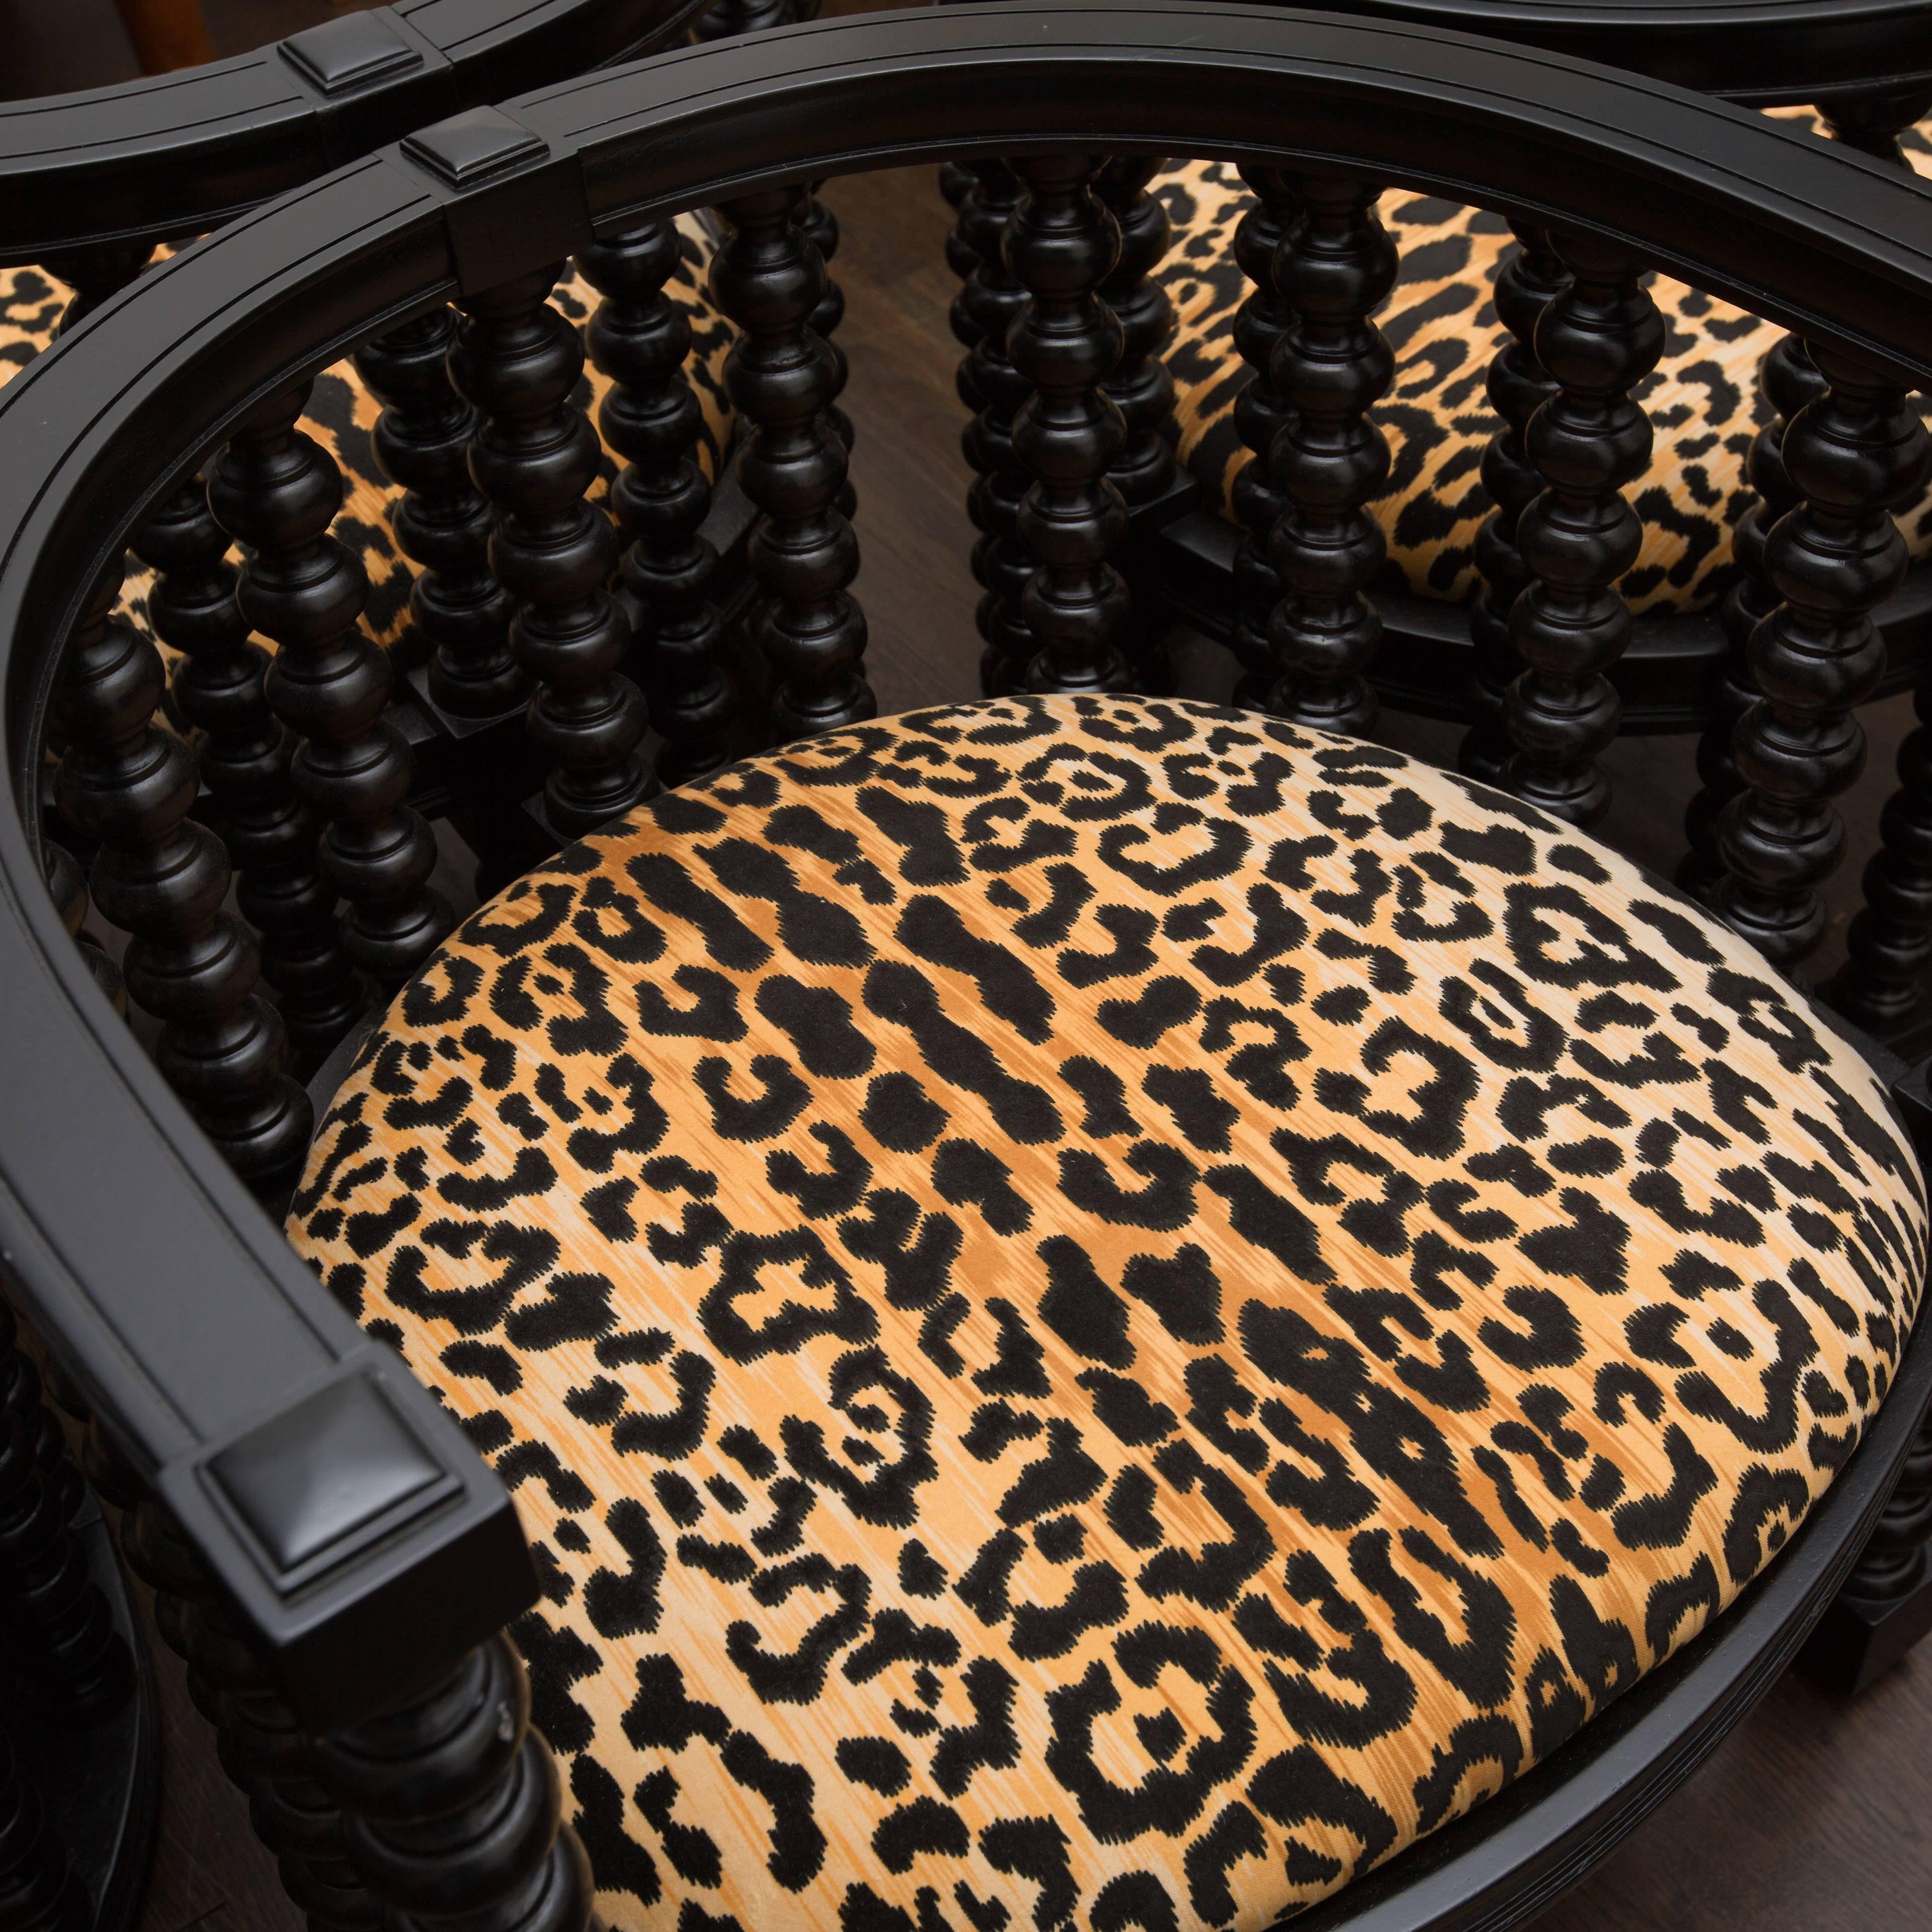 Pair of Ebony Spindle Back Barrel Chairs in Faux Leopard 1